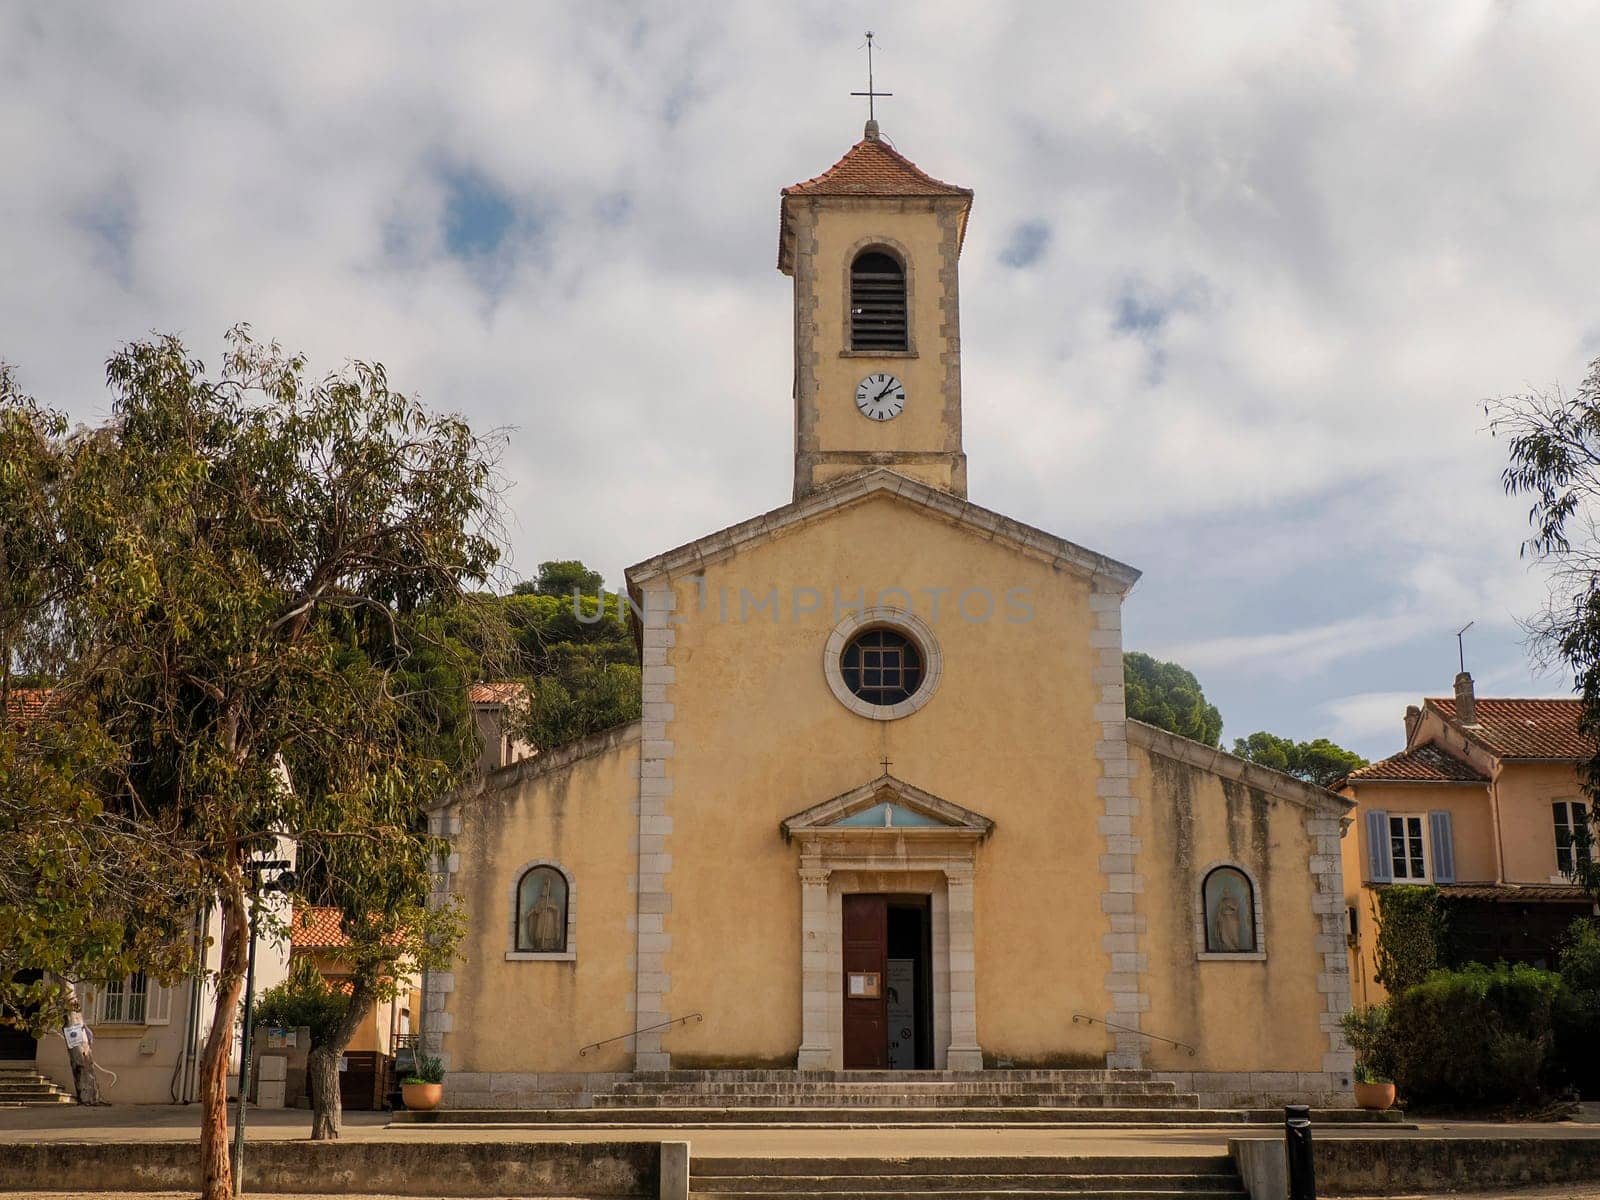 old church in main place of village of porquerolles island france, panorama landscape